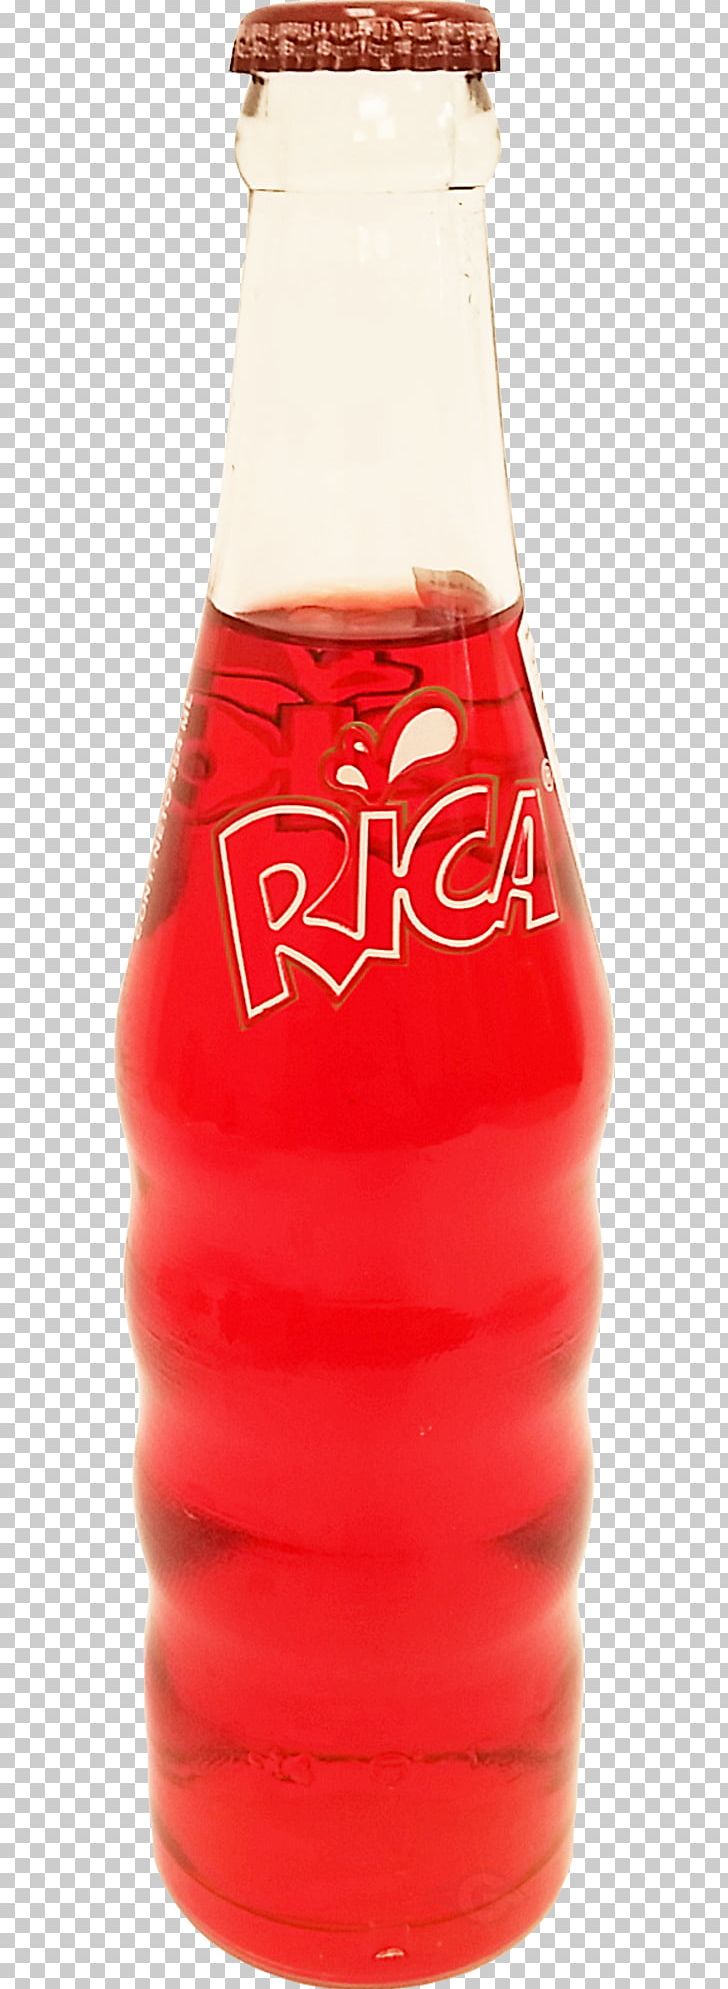 Pomegranate Juice Glass Bottle Fizzy Drinks PNG, Clipart, Bottle, Corn Juice, Drink, Drinking, Fizzy Drinks Free PNG Download